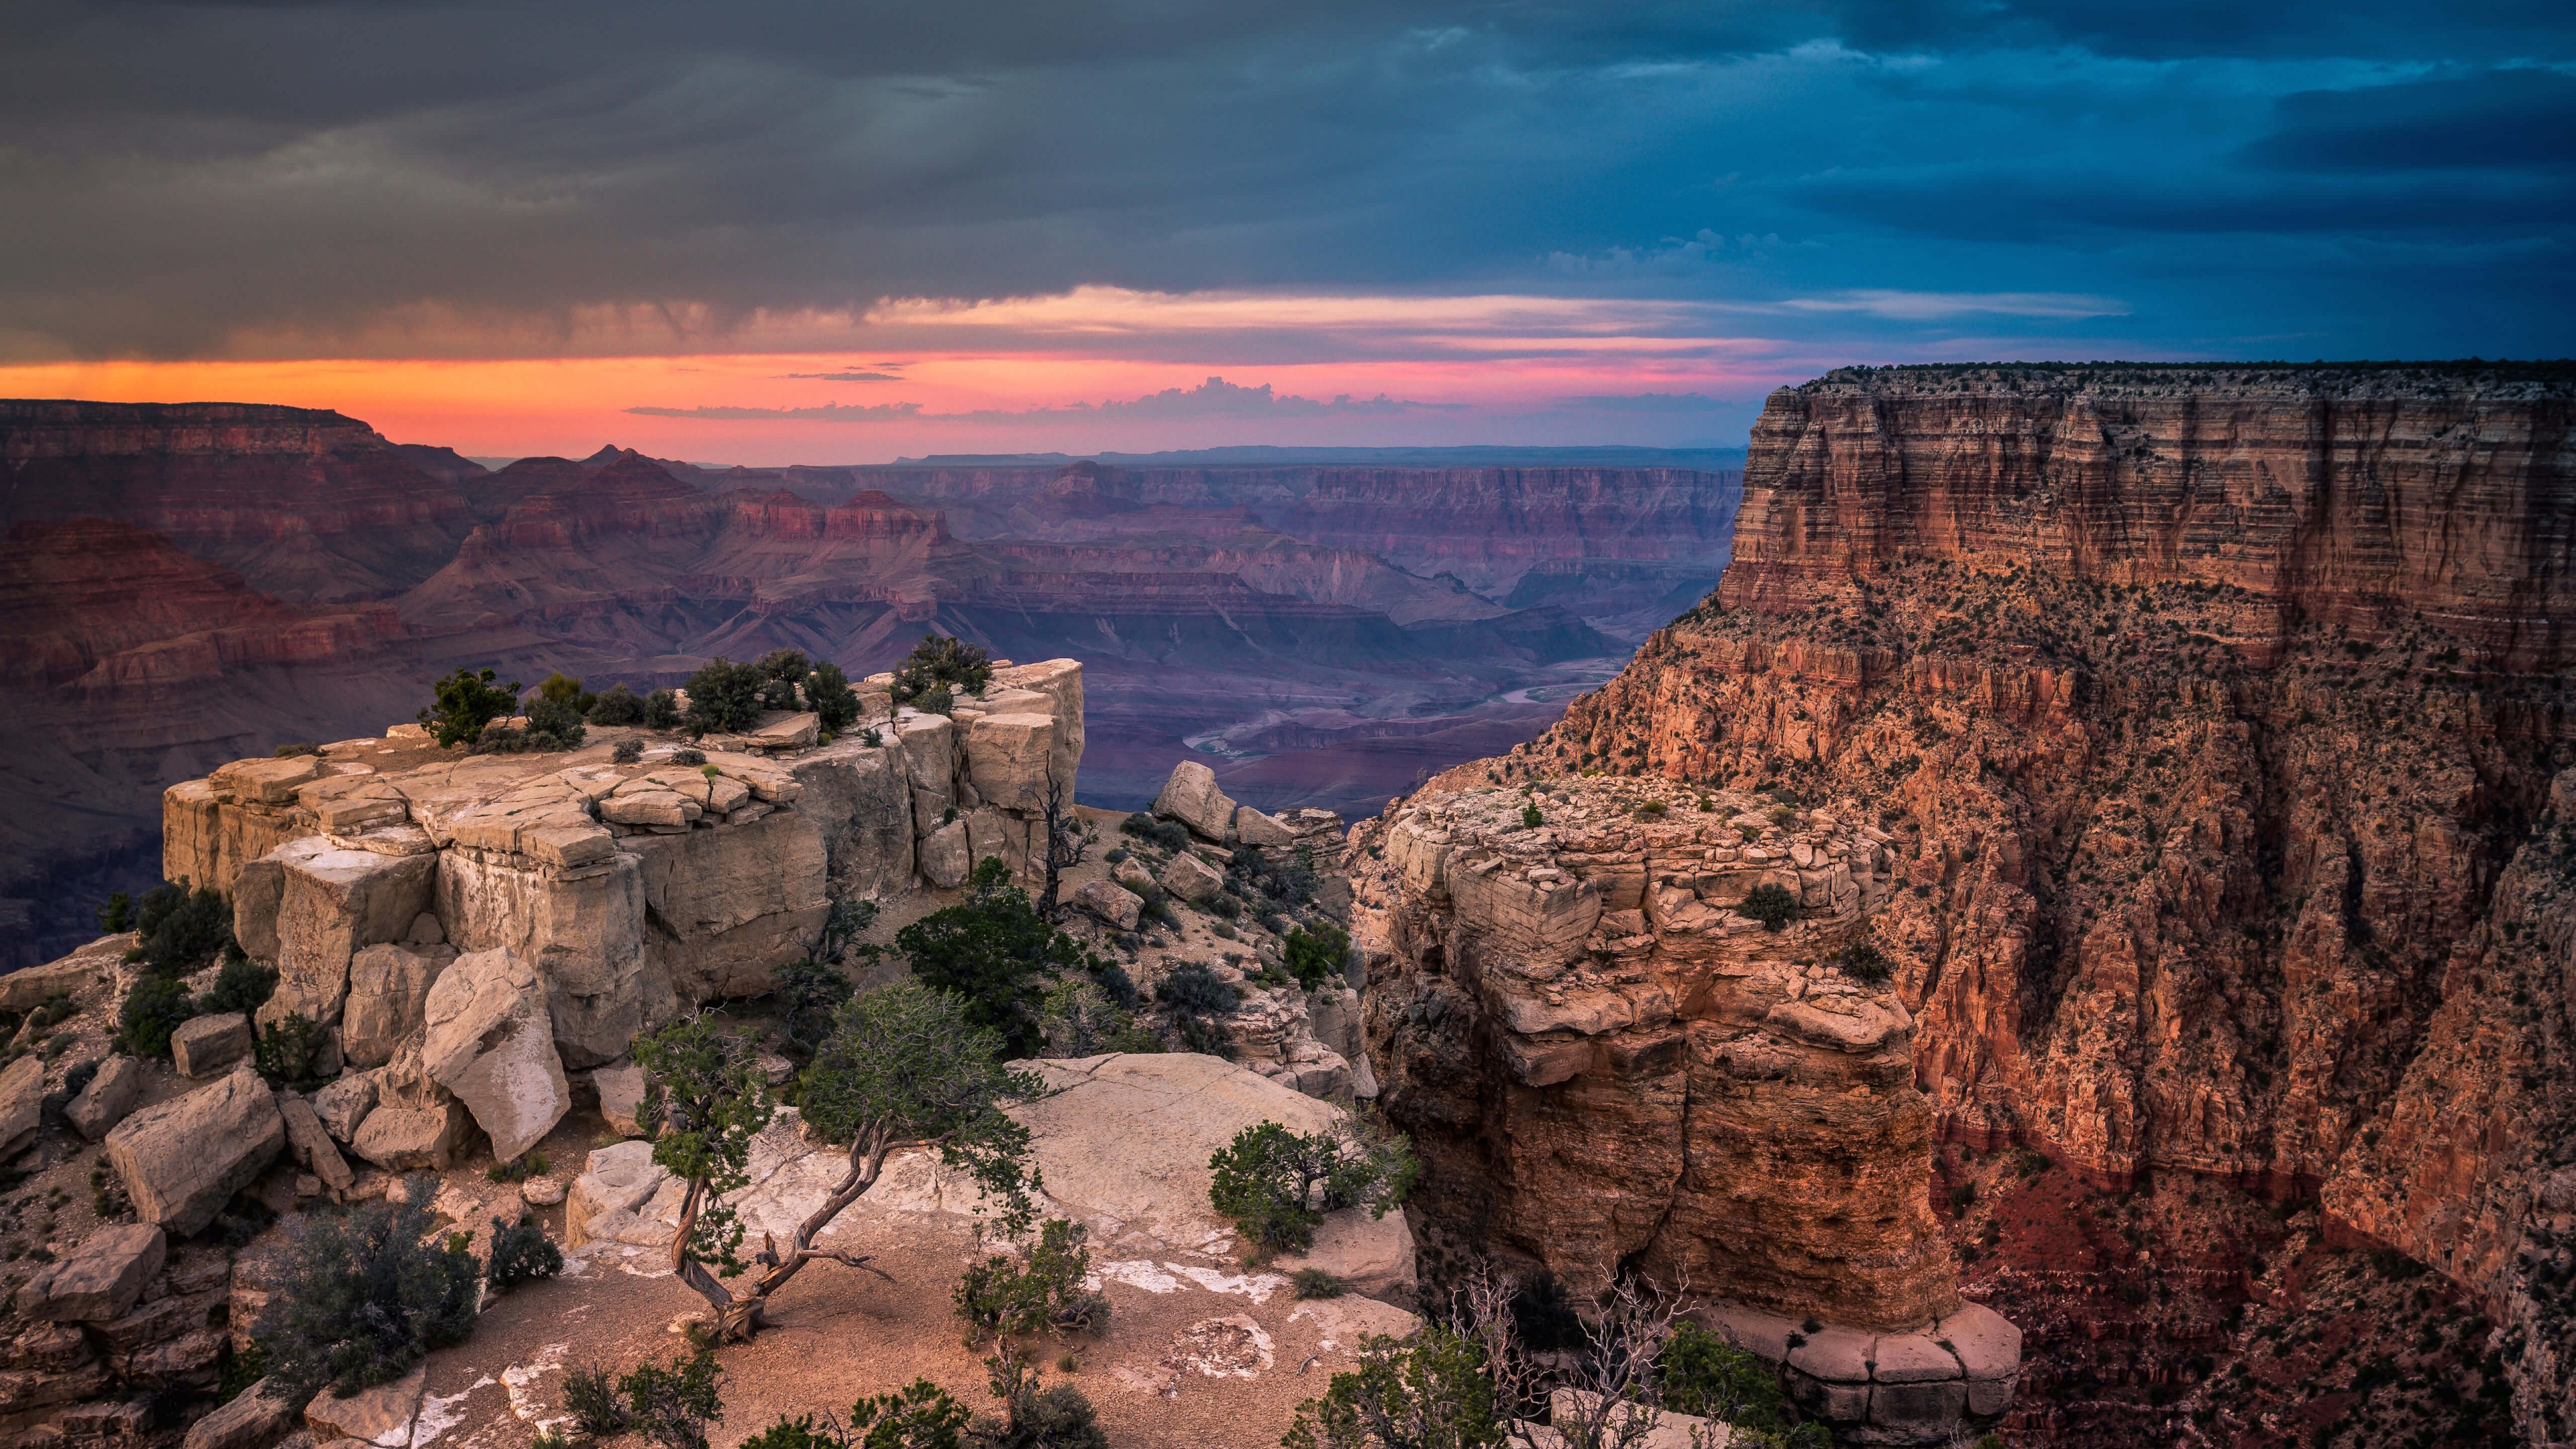 Download Sunset At The Grand Canyon HD wallpaper for 4K 3840 x 2160